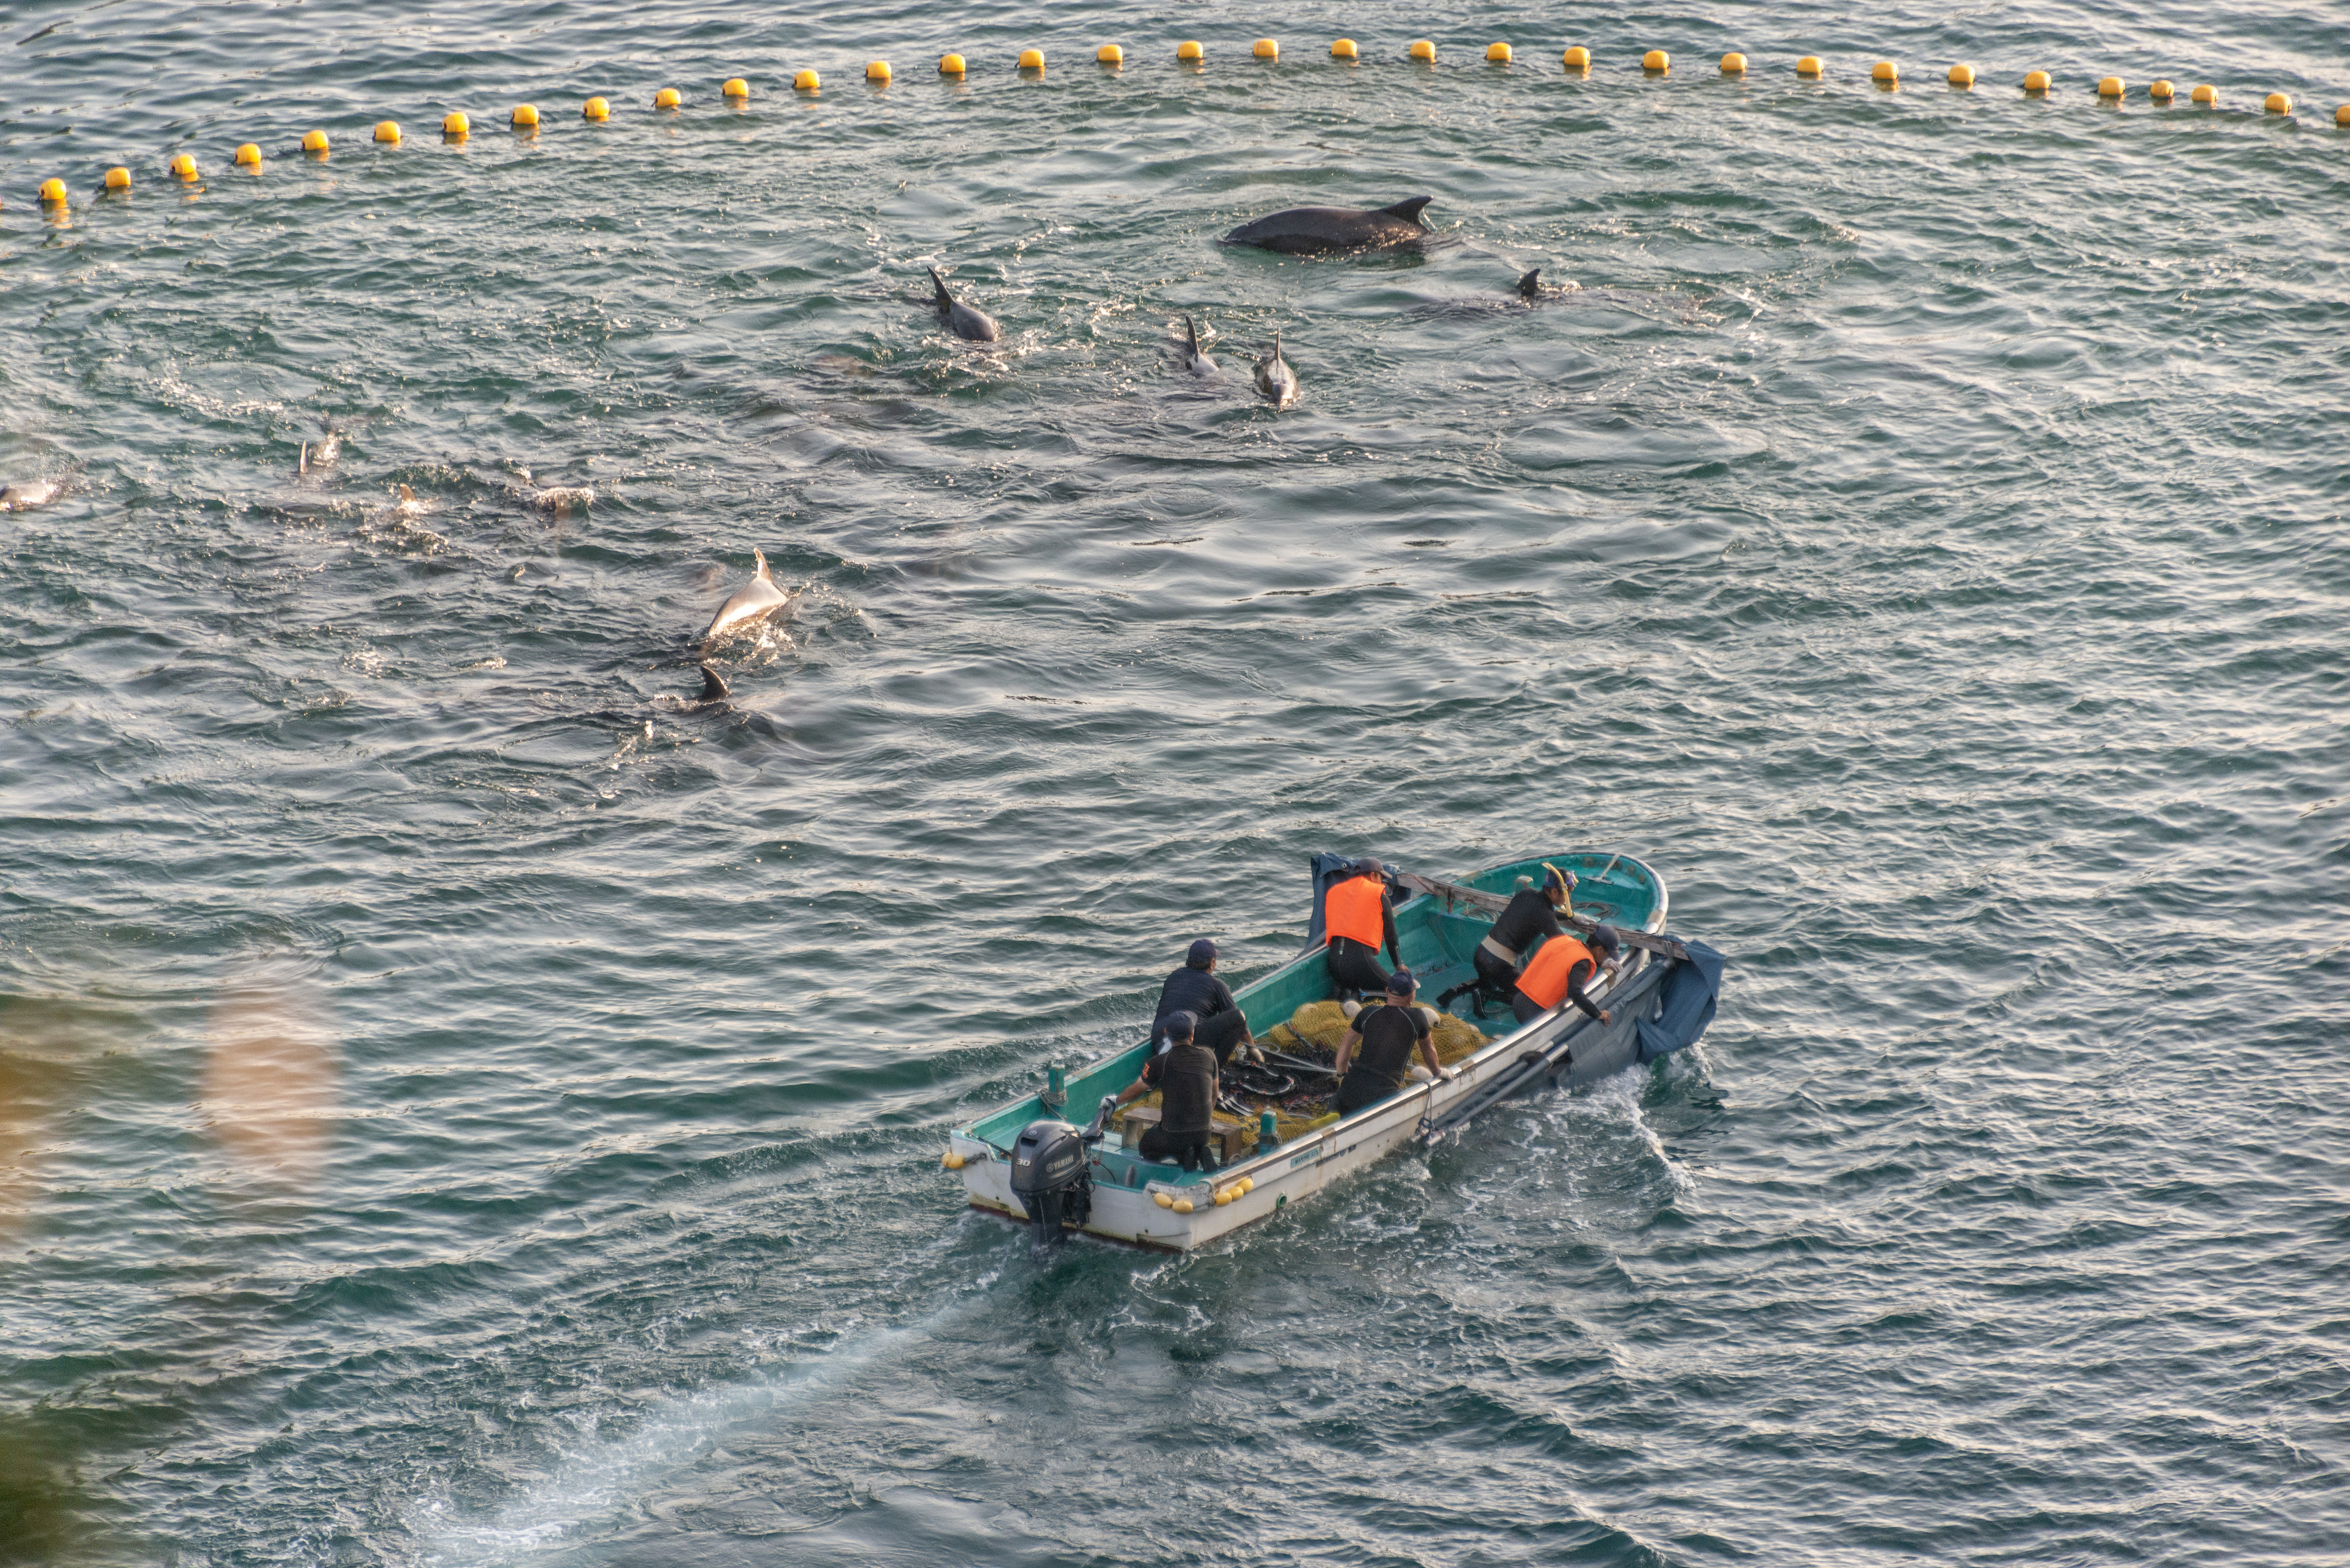 Dolphin hunters in Taiji, Japan gather to mercilessly hunt down wild pods of dolphins or other small whales who pass through the waters. Image credit: Robert Gilhooly